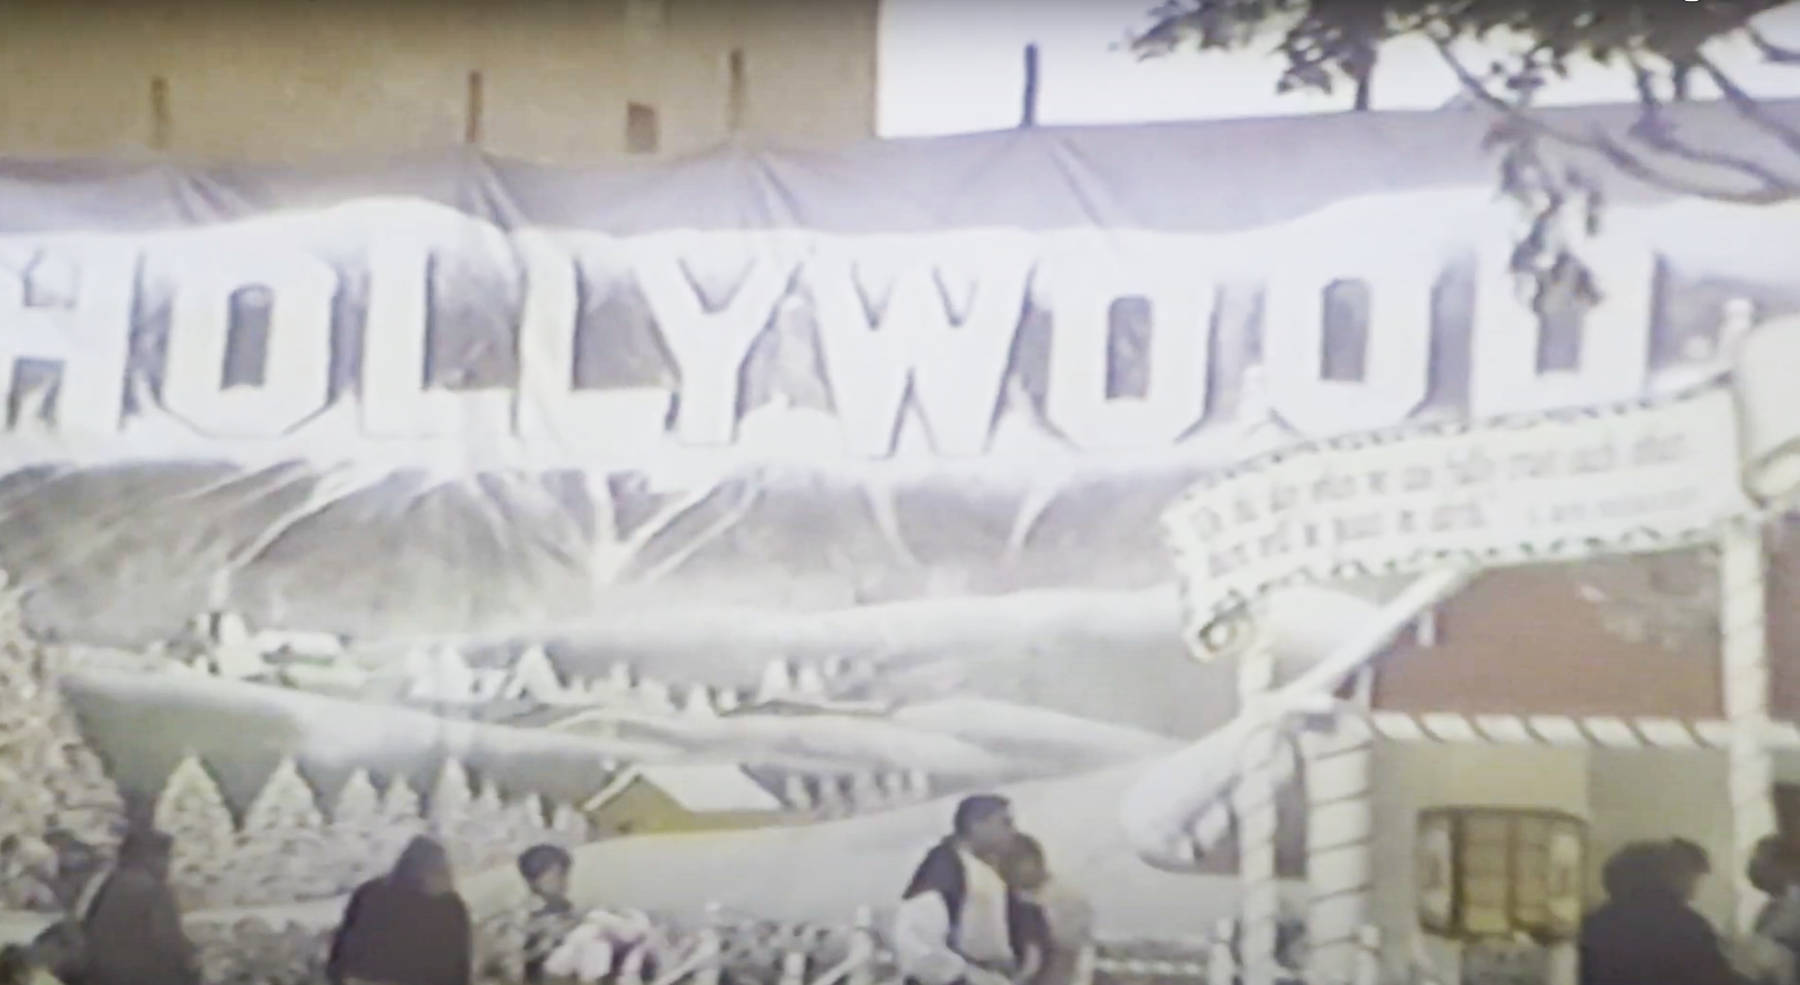 Styrofoam Snow on Hollywood Boulevard In our series of Christmas Essays, Tim London remembers 90s Los Angeles, not too fondly